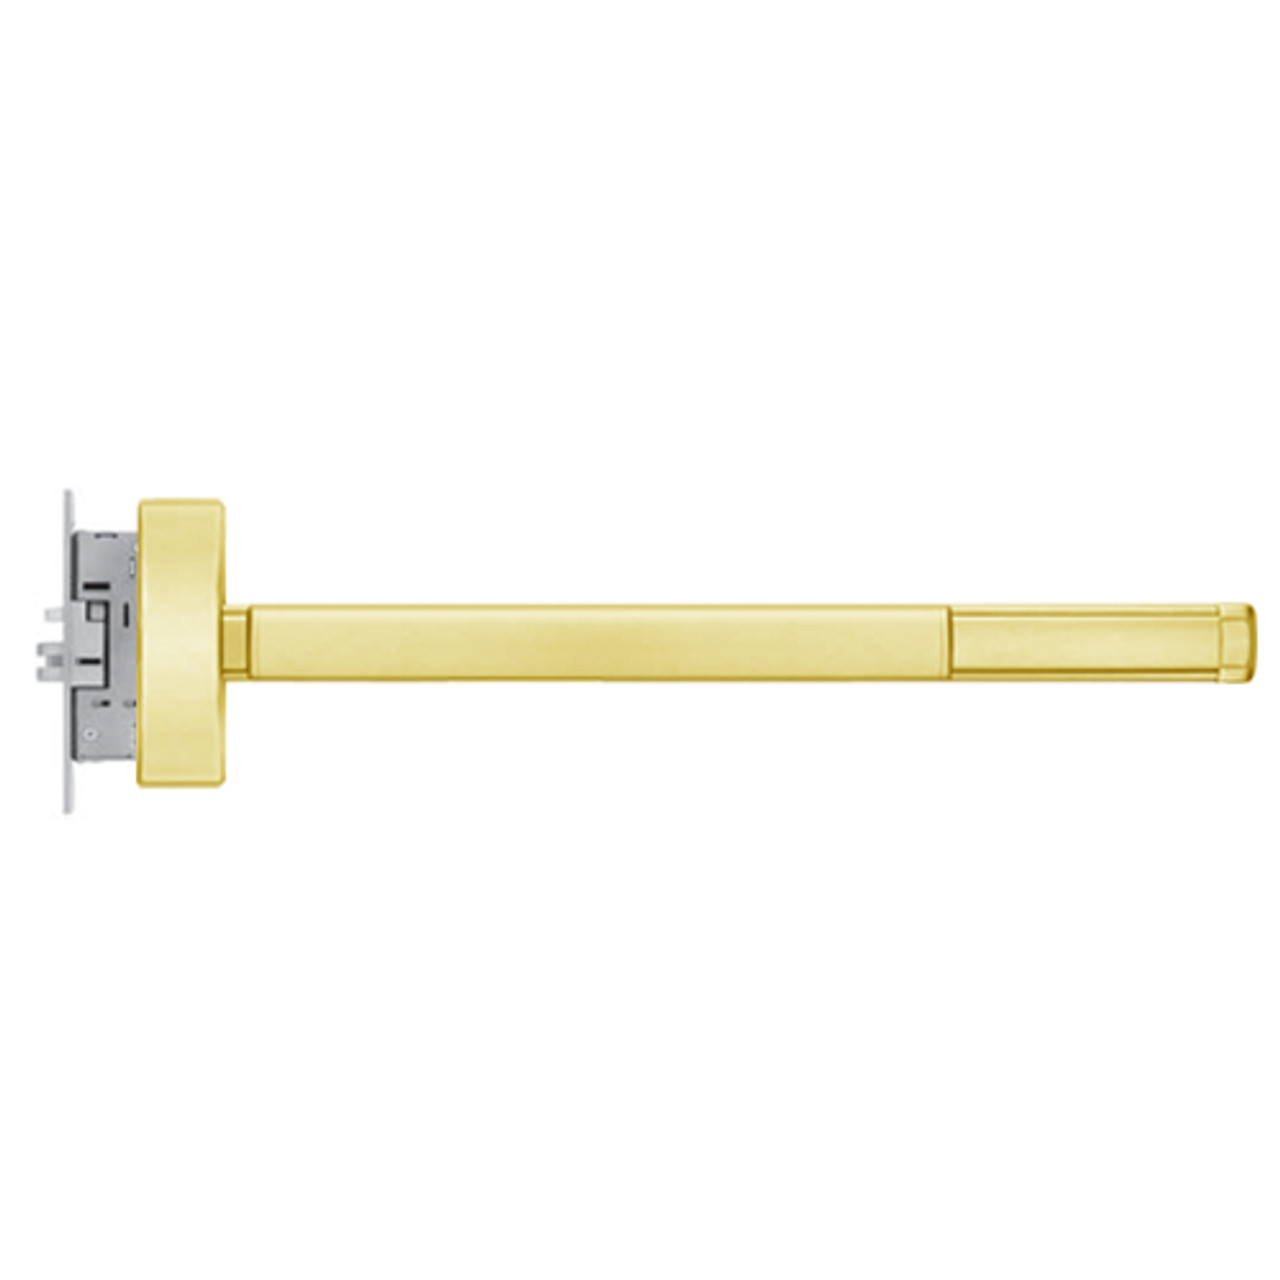 ELR2314-RHR-605-36 PHI 2300 Series Apex Mortise Exit Device with Electric Latch Retraction Prepped for Lever-Knob Always Active in Bright Brass Finish